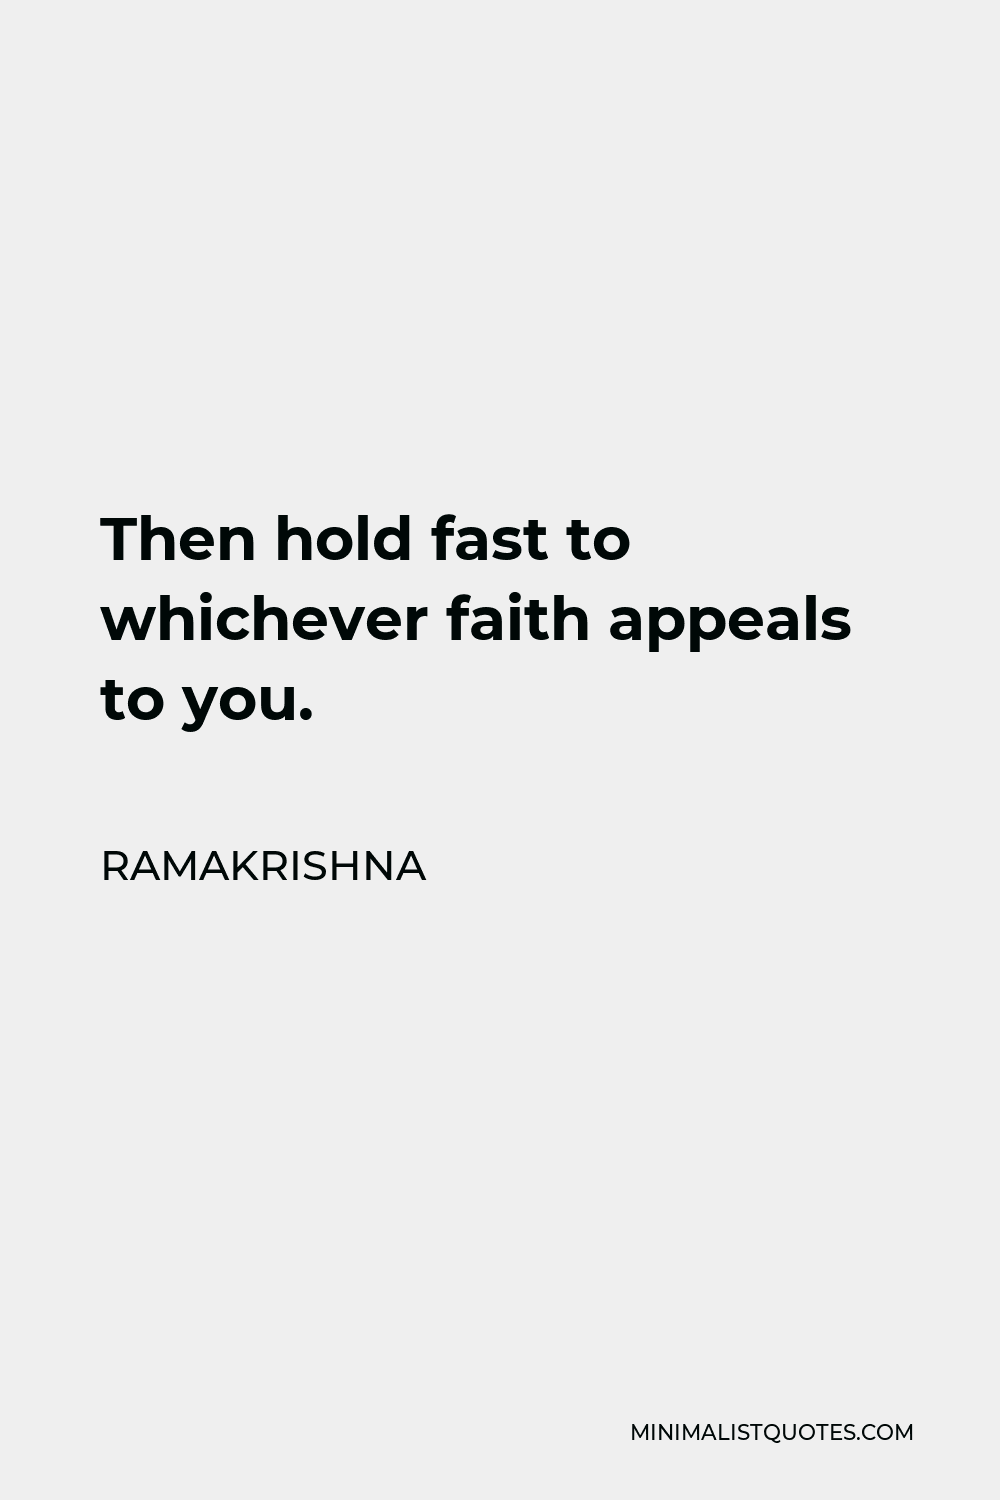 Ramakrishna Quote - Then hold fast to whichever faith appeals to you.